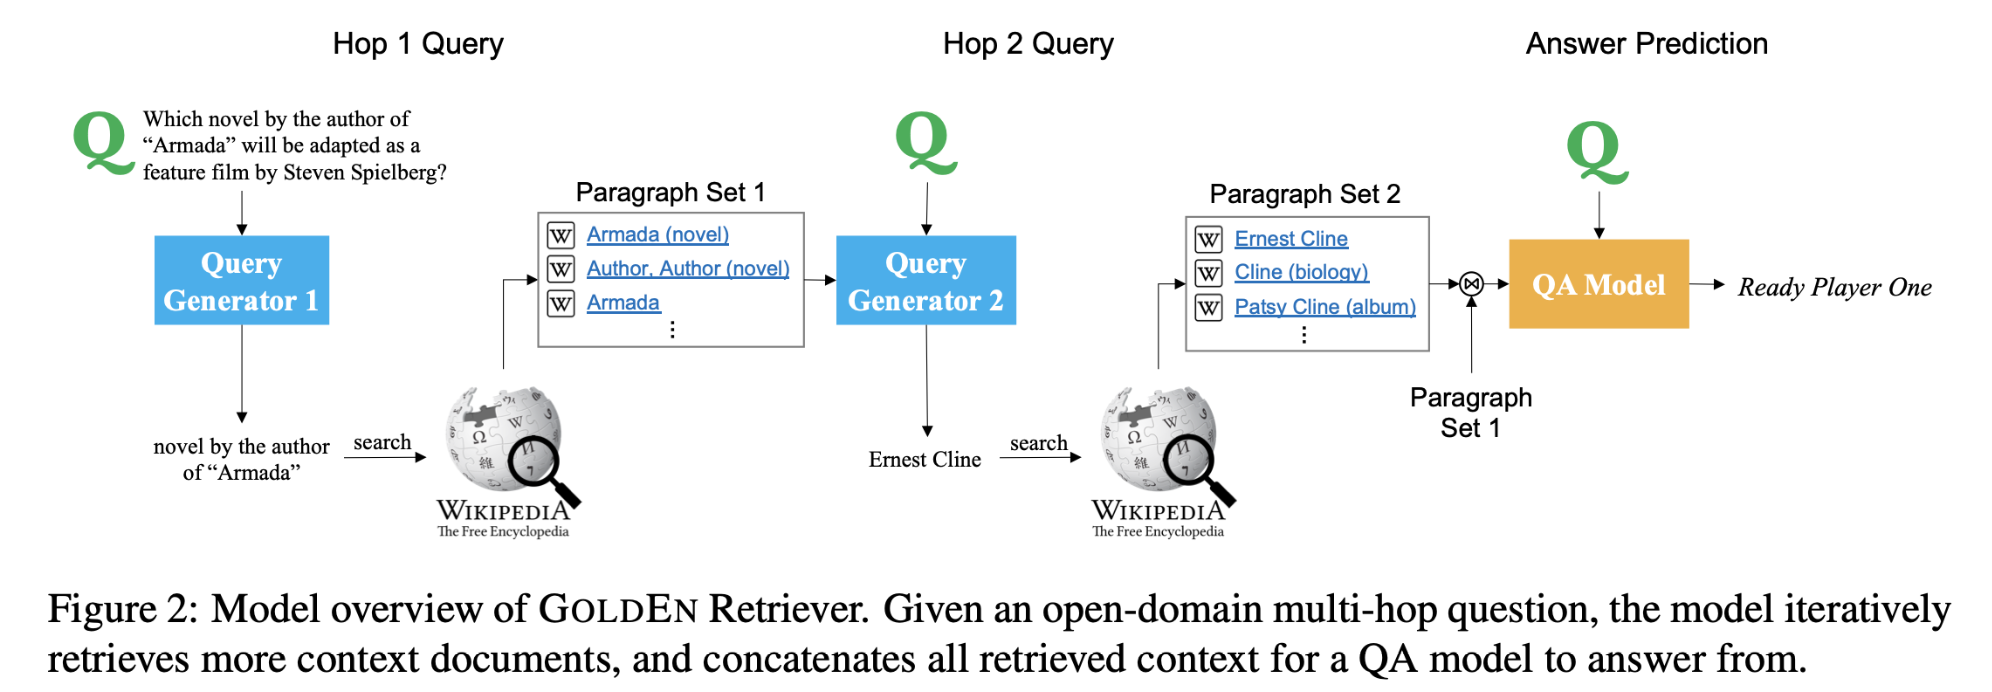 Answering Complex Open-domain Questions Through Iterative Query Generation